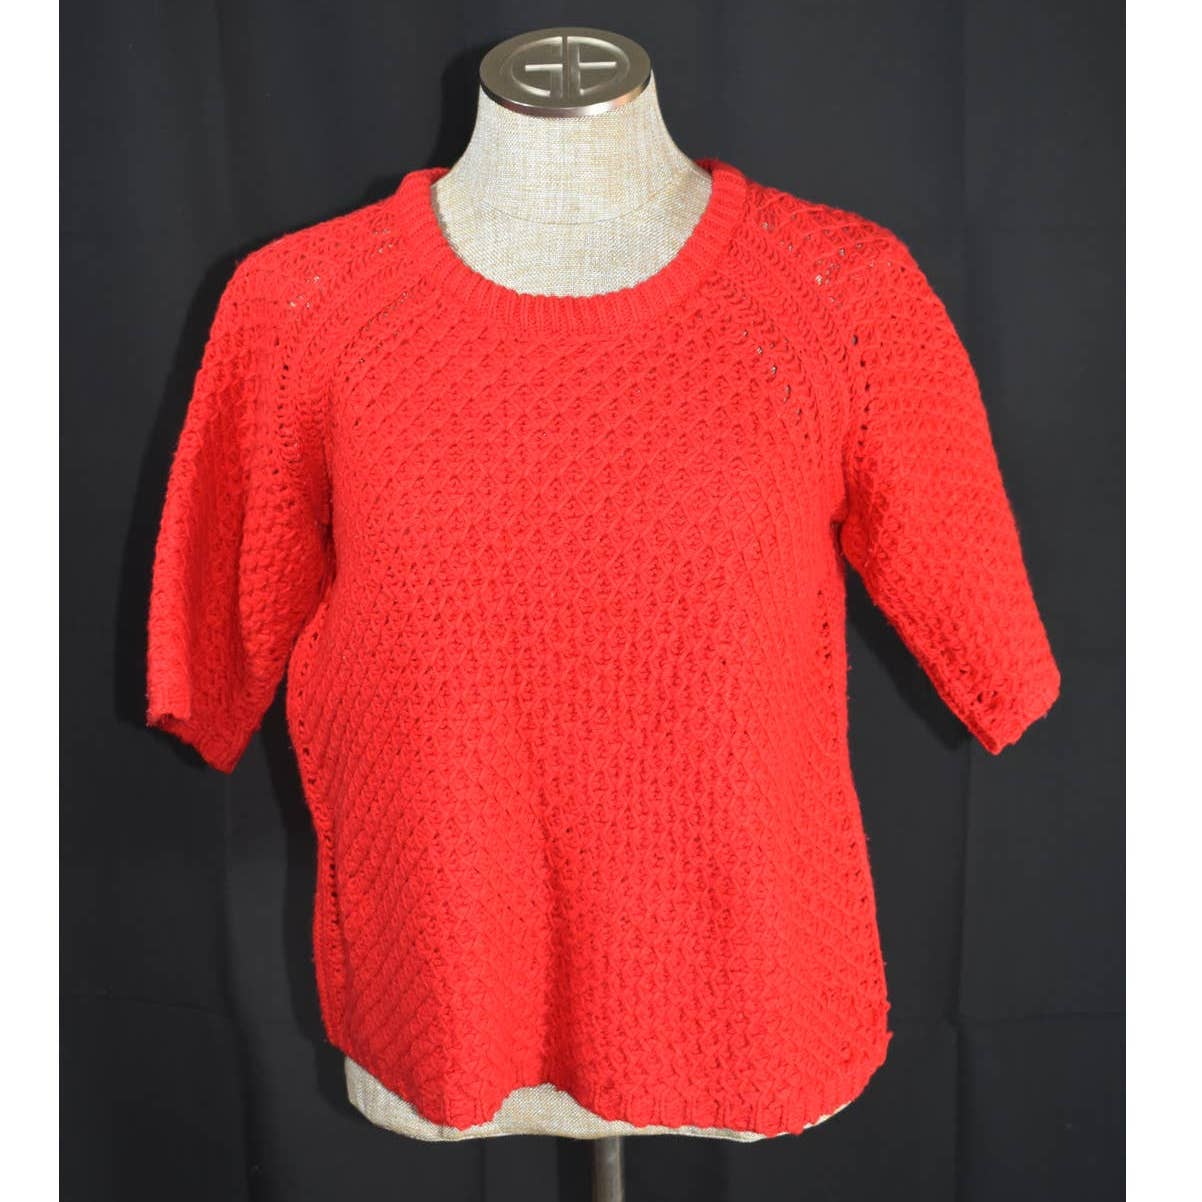 Marc by Marc Jacobs Red Merino Wool Knit Crewneck Sweater - S